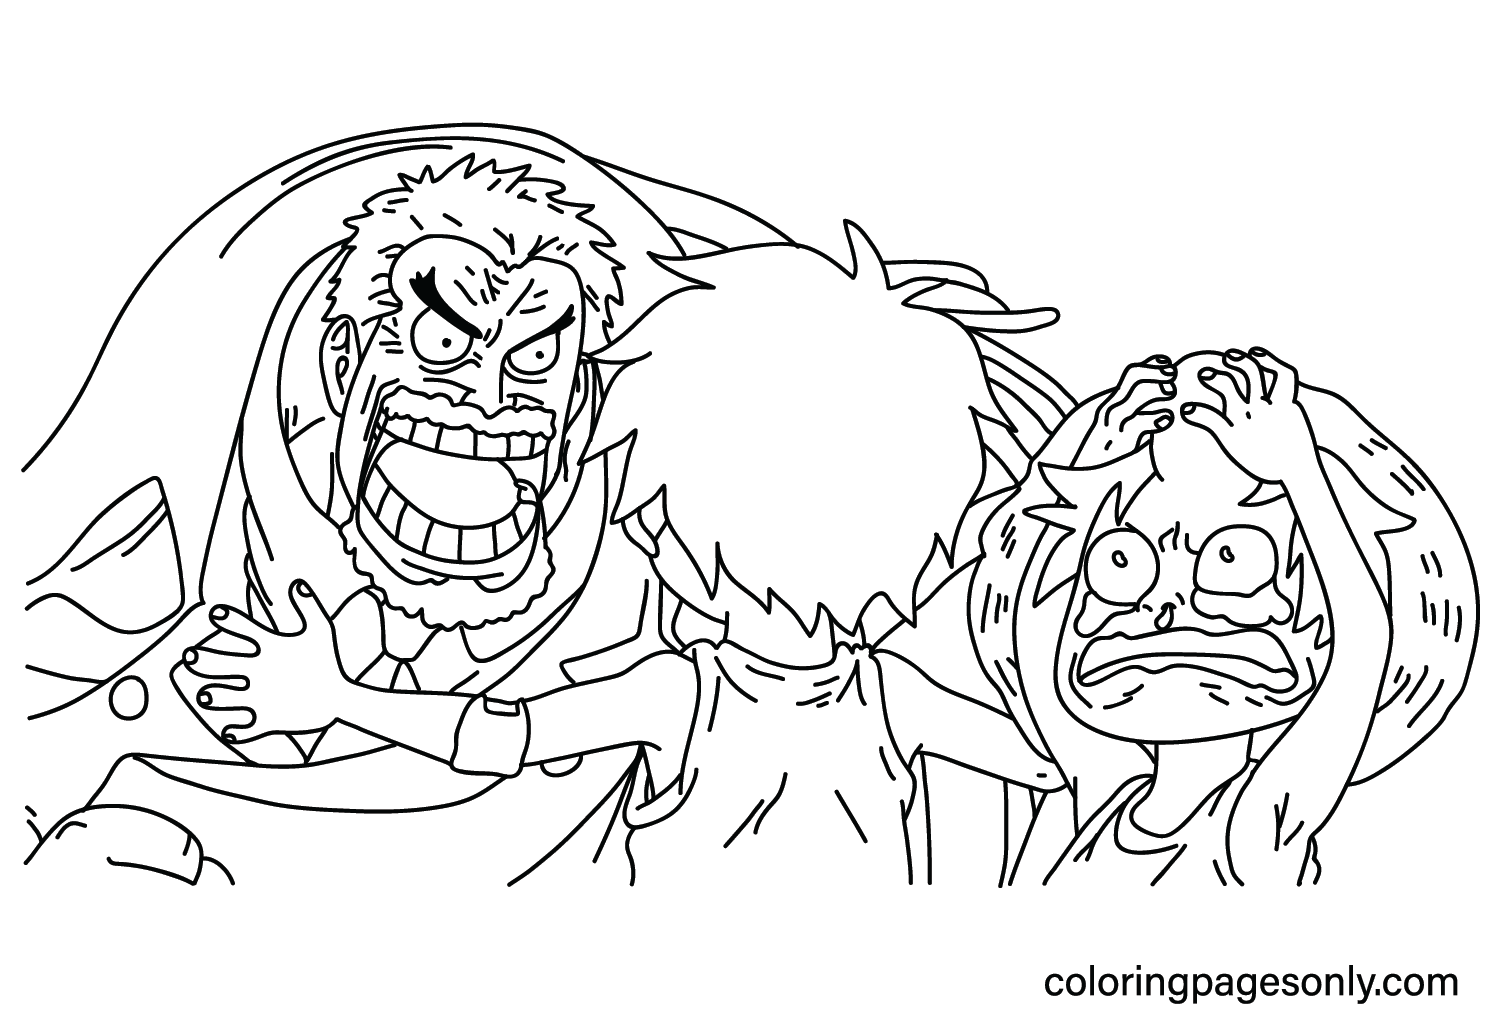 Monkey D. Garp, Ace, Luffy Coloring Page from Portgas D. Ace